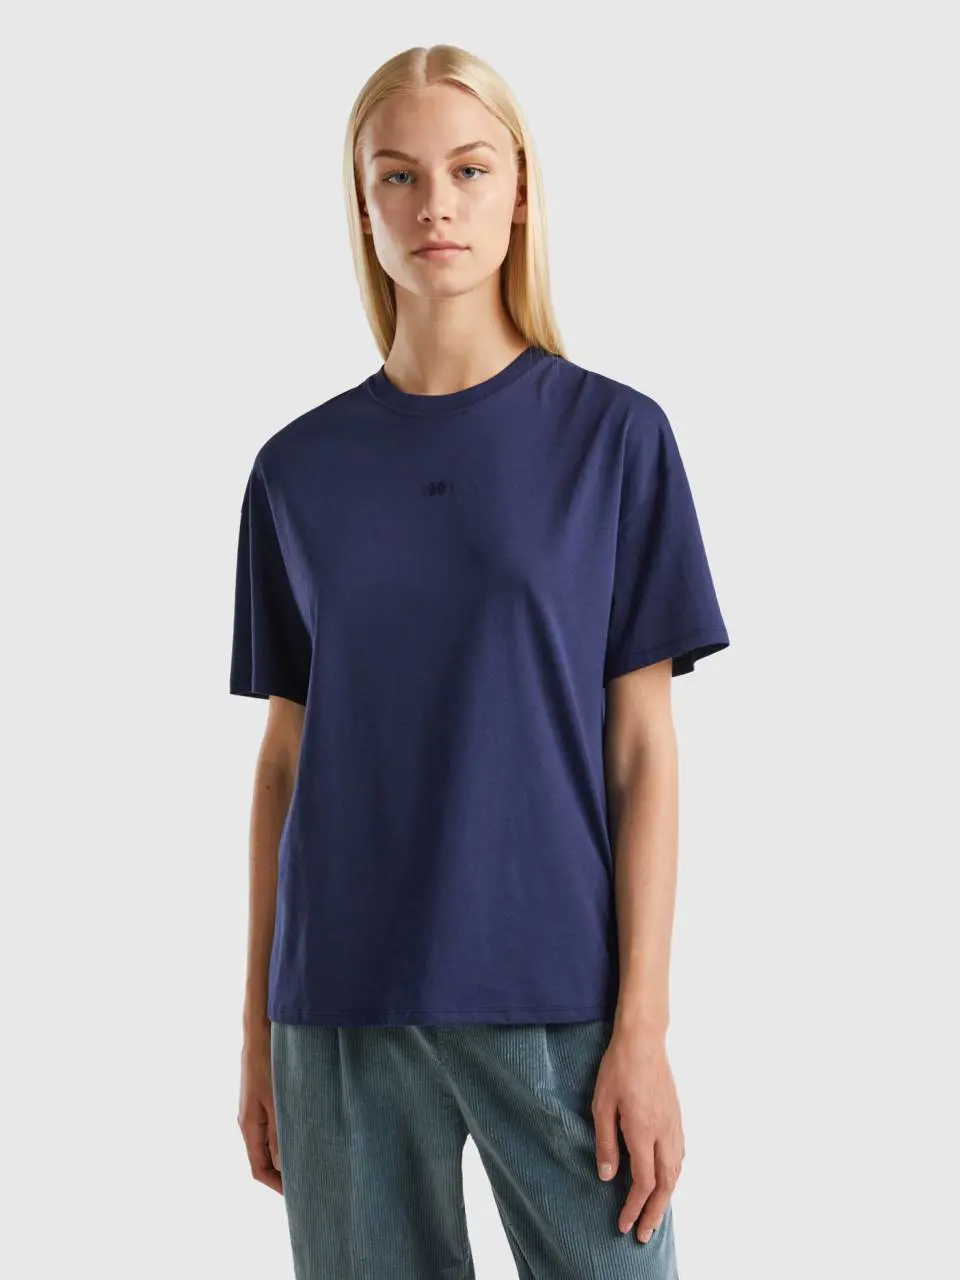 Benetton t-shirt with embroidered logo. 1